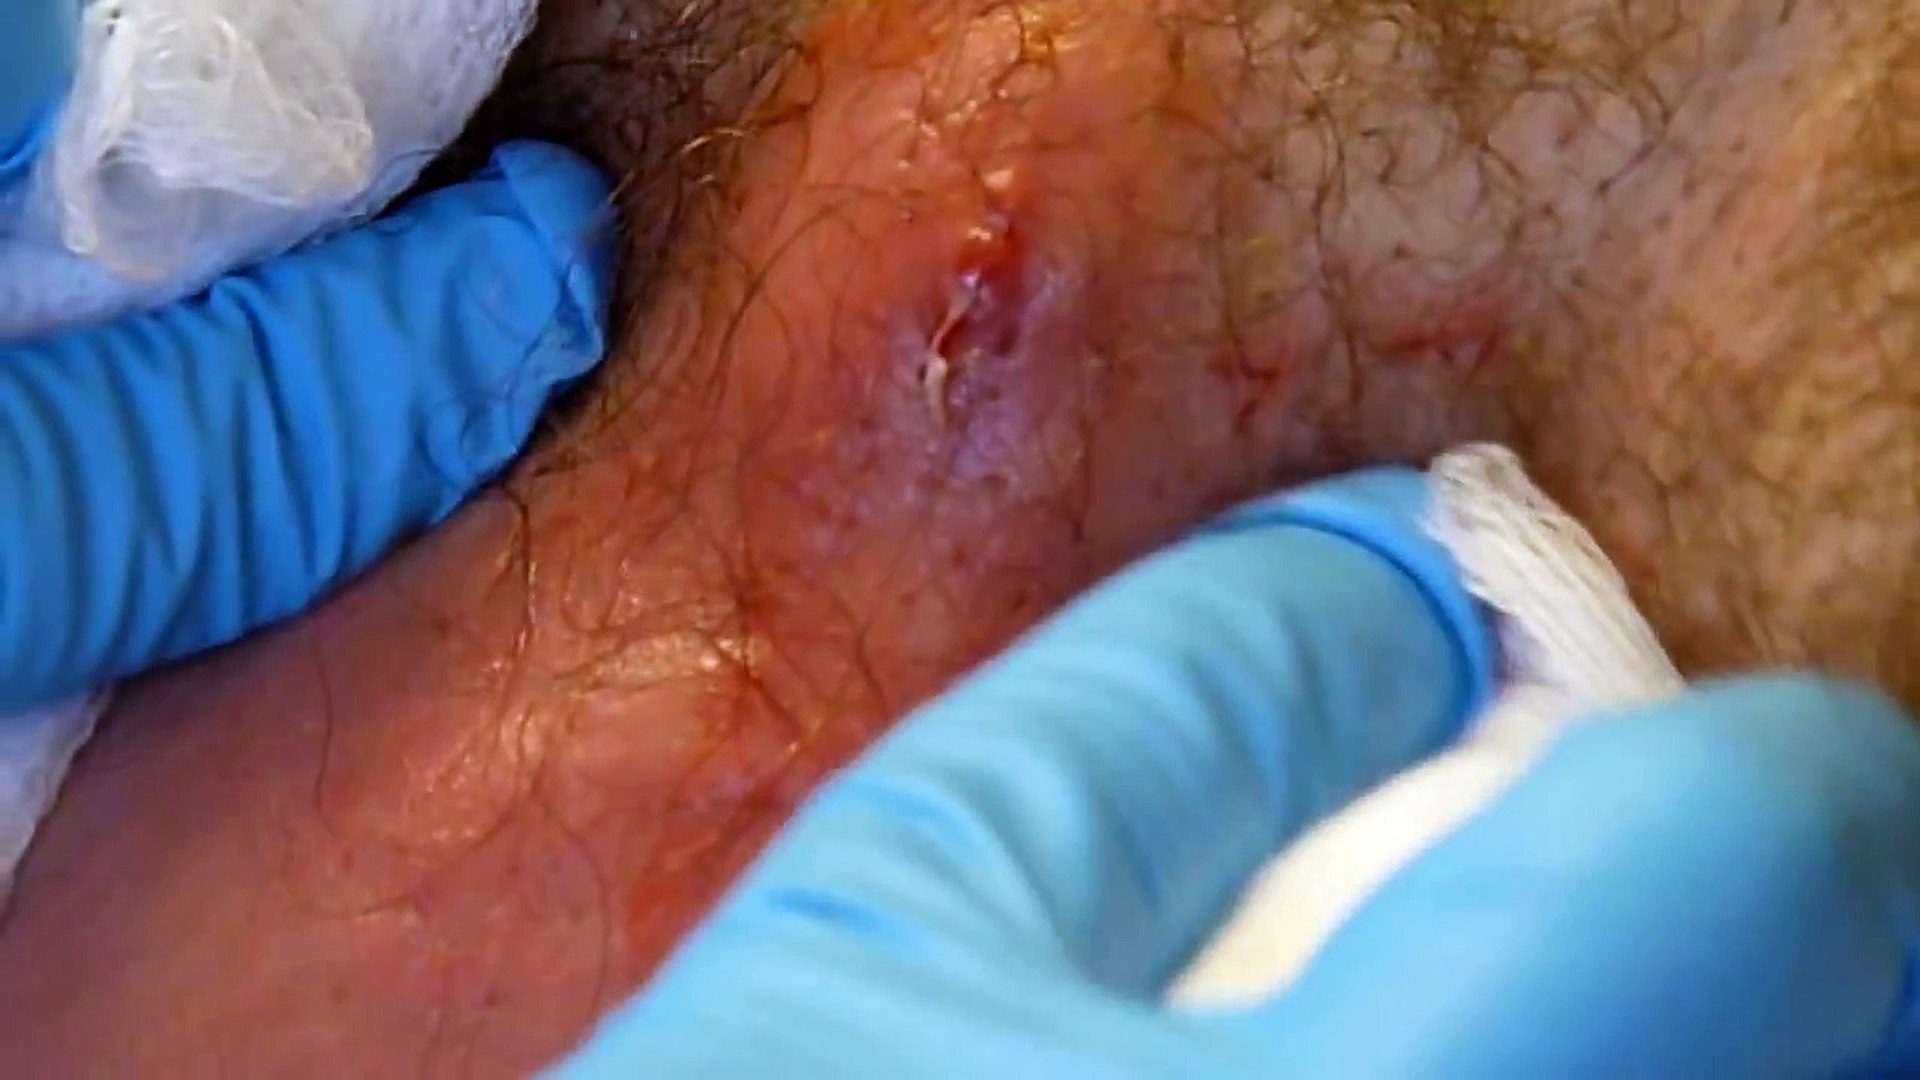 Huge Abscess Staph Infection Popped In Armpit Huge Plug Removed